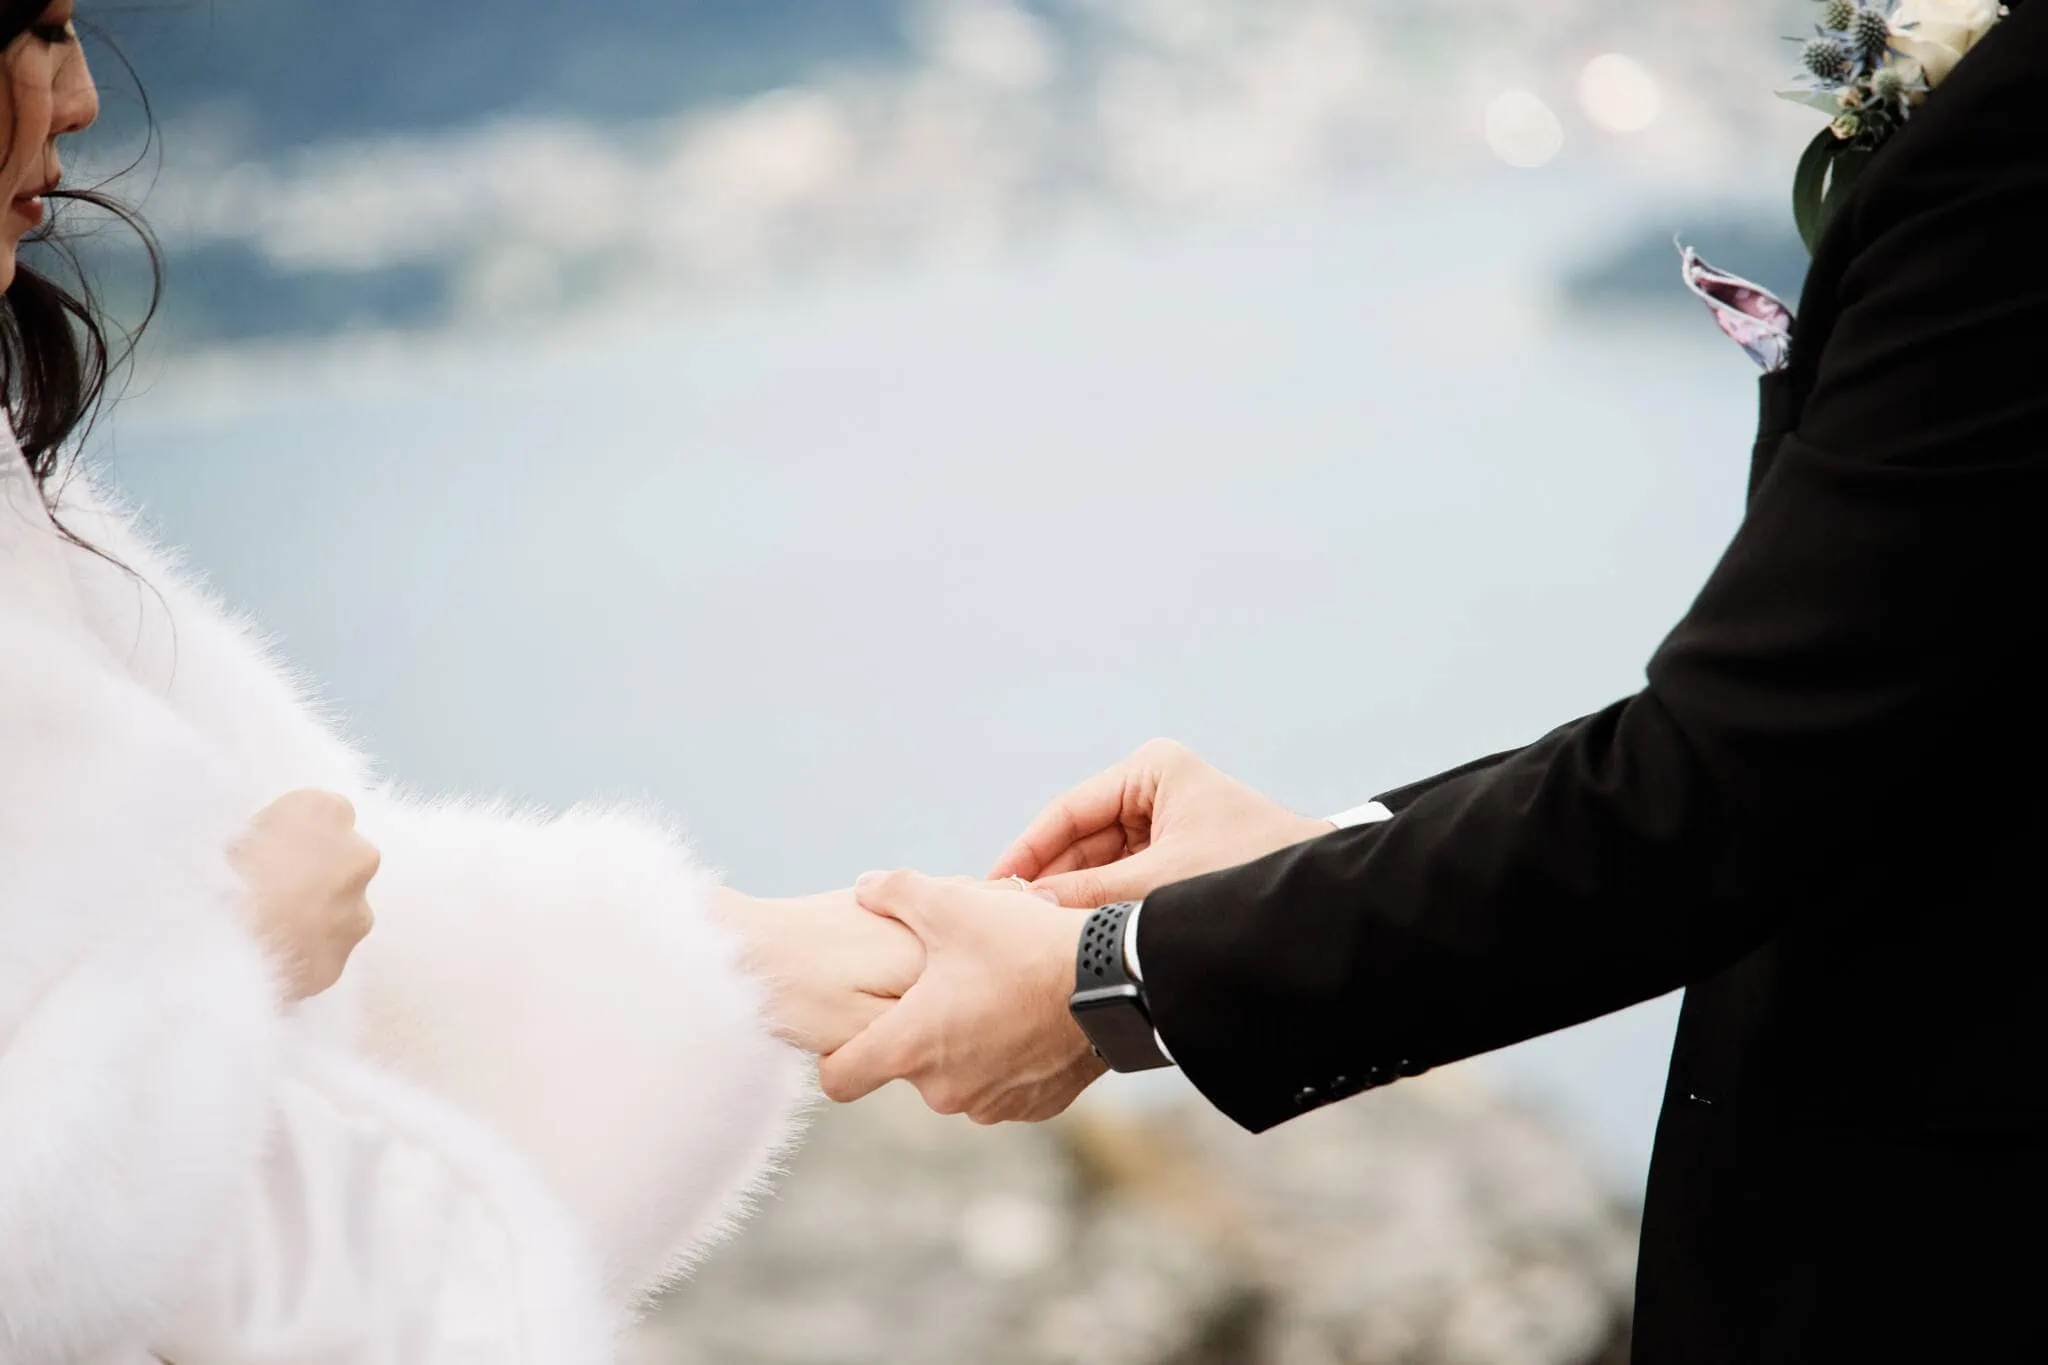 Carlos and Wanzhu's intimate wedding ceremony at Cecil Peak, holding hands in front of a lake.